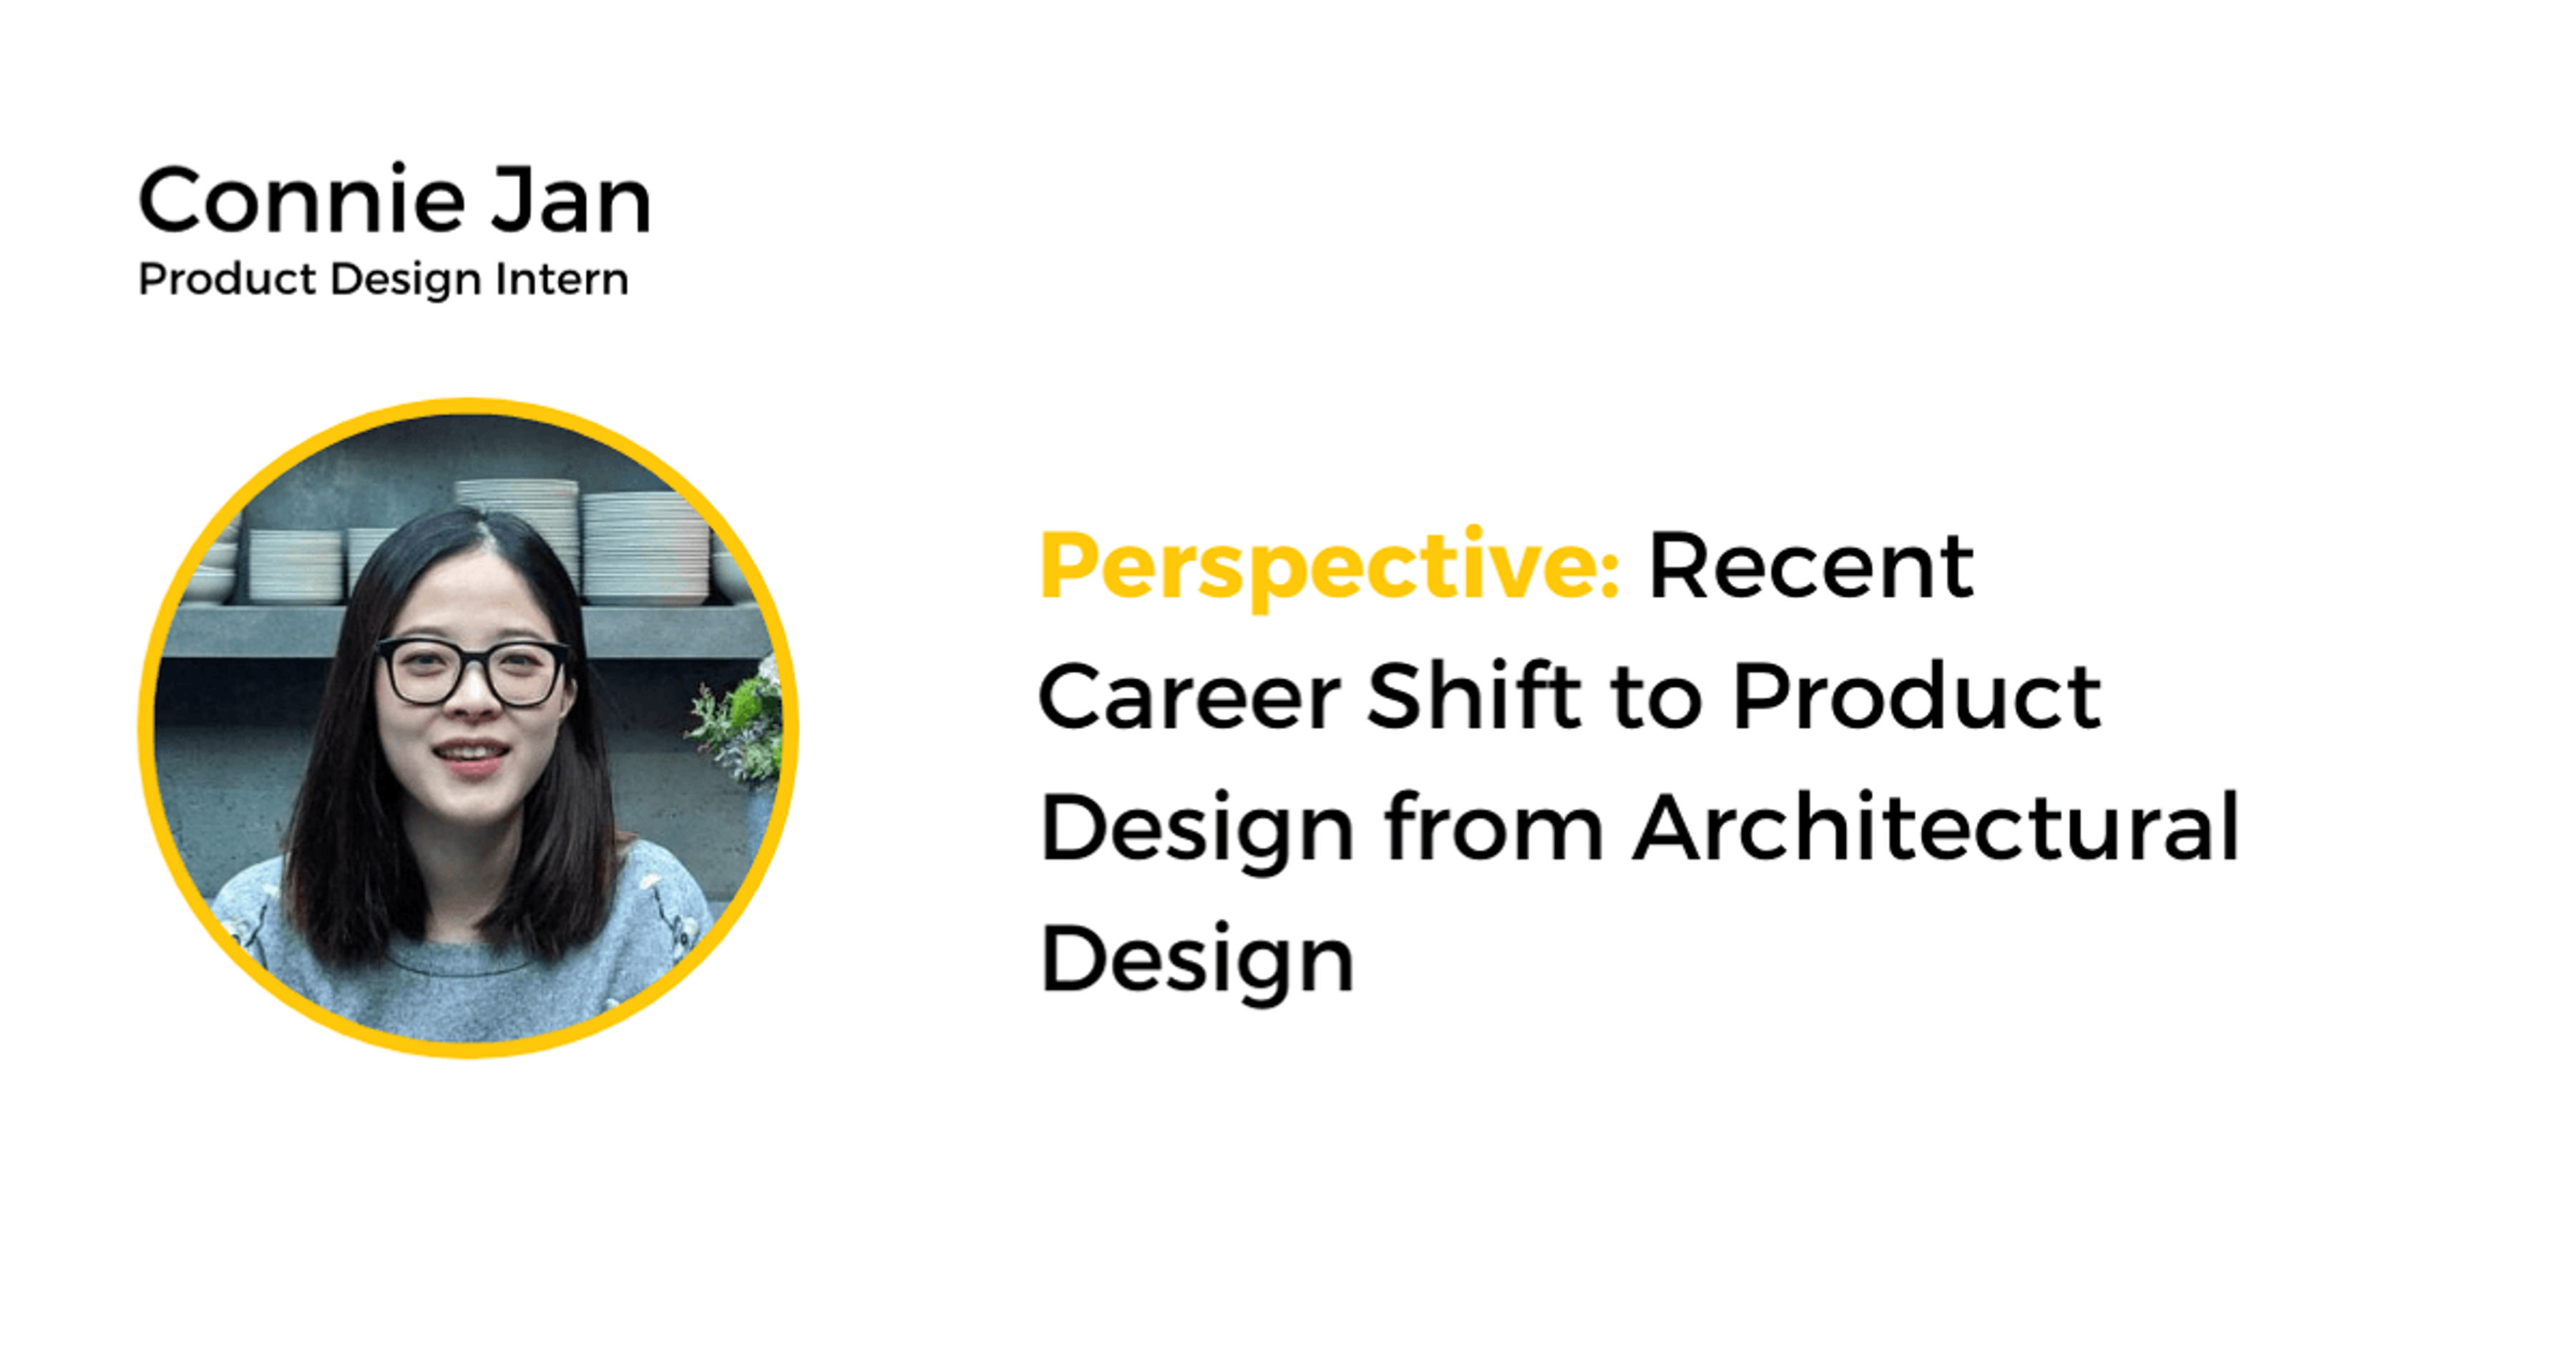 Connie Jan, design intern, shares her perspective on career shift to product design.